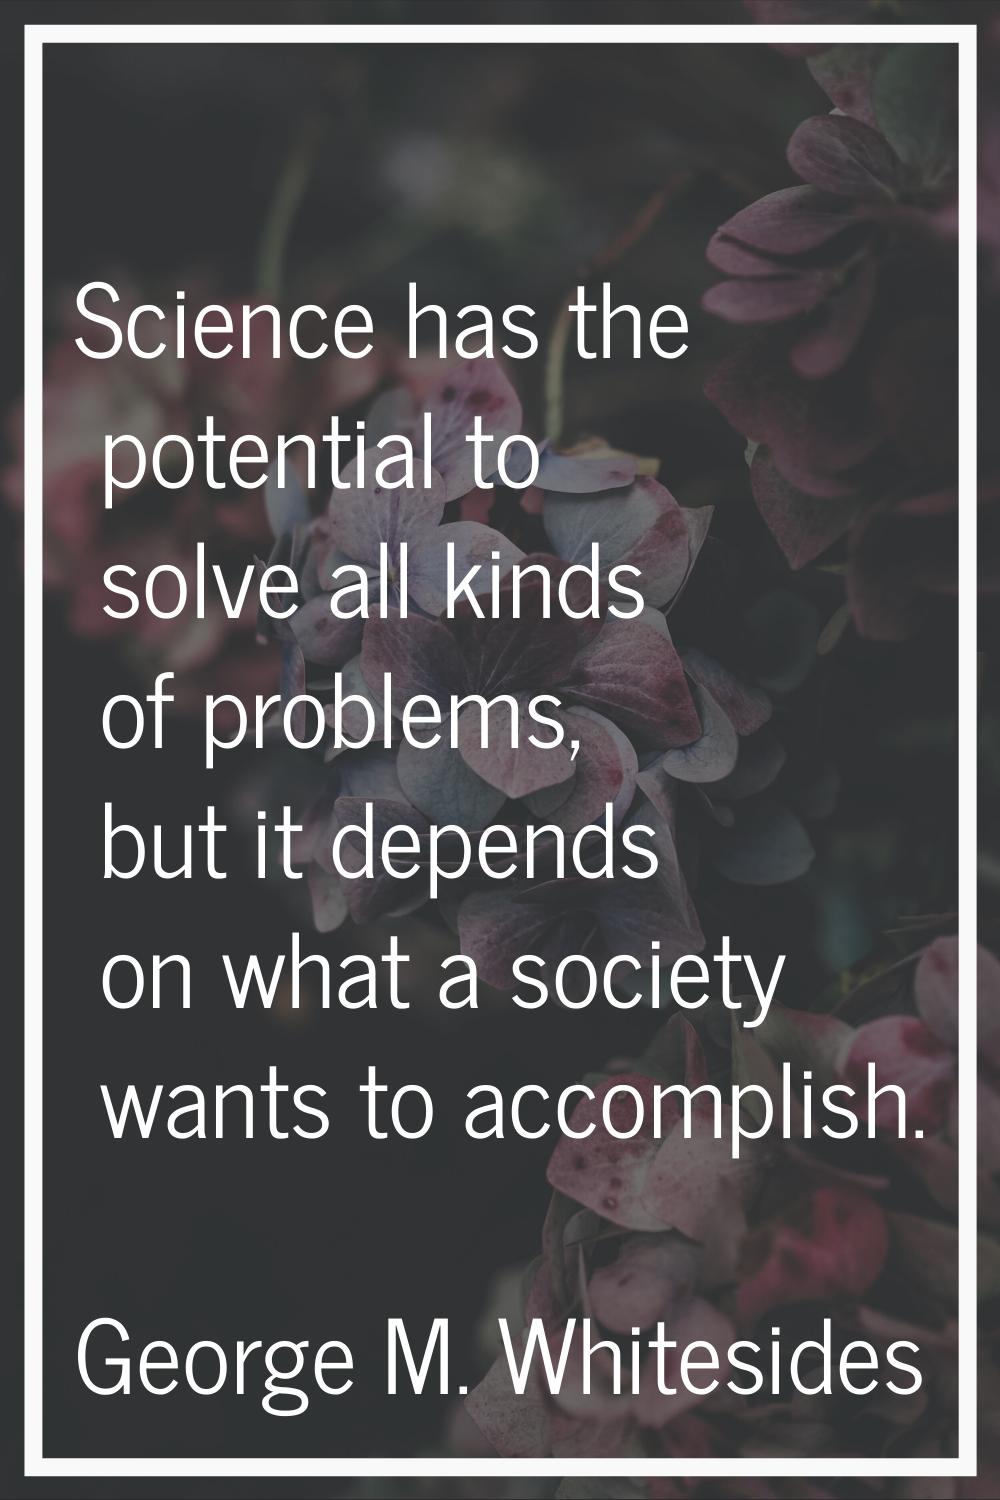 Science has the potential to solve all kinds of problems, but it depends on what a society wants to